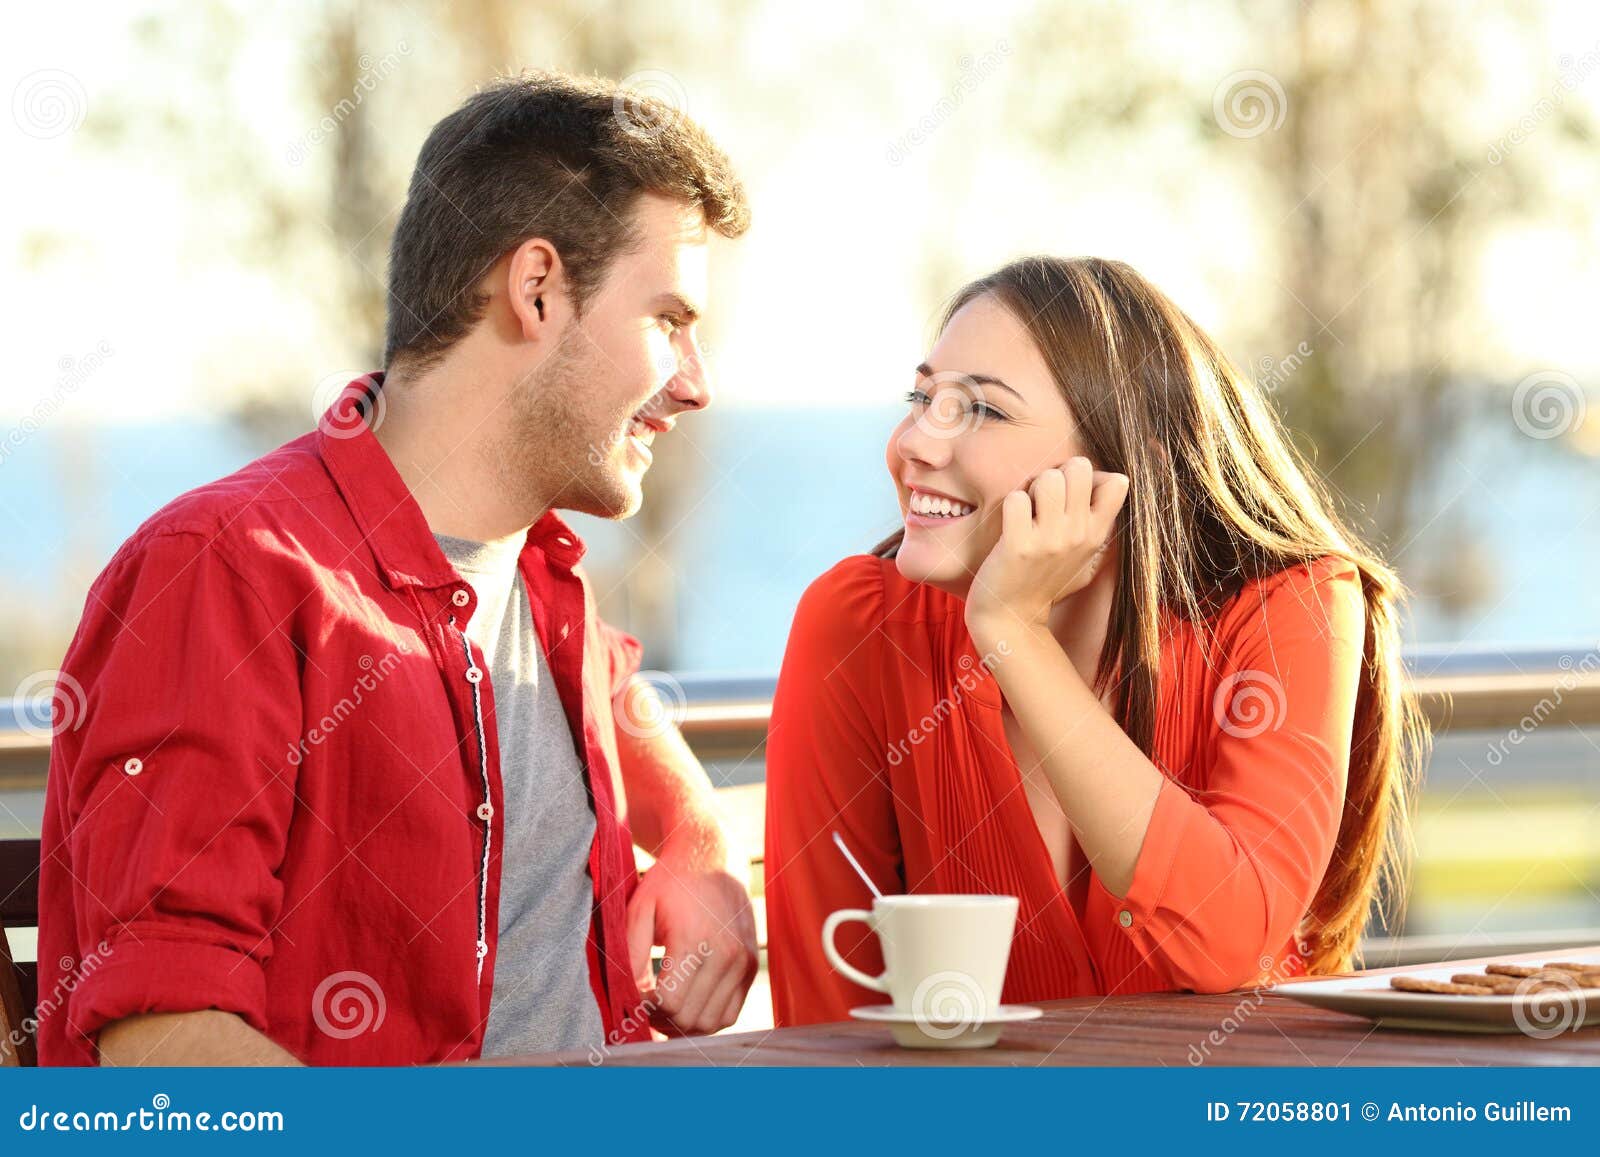 candid couple in love flirting in a terrace